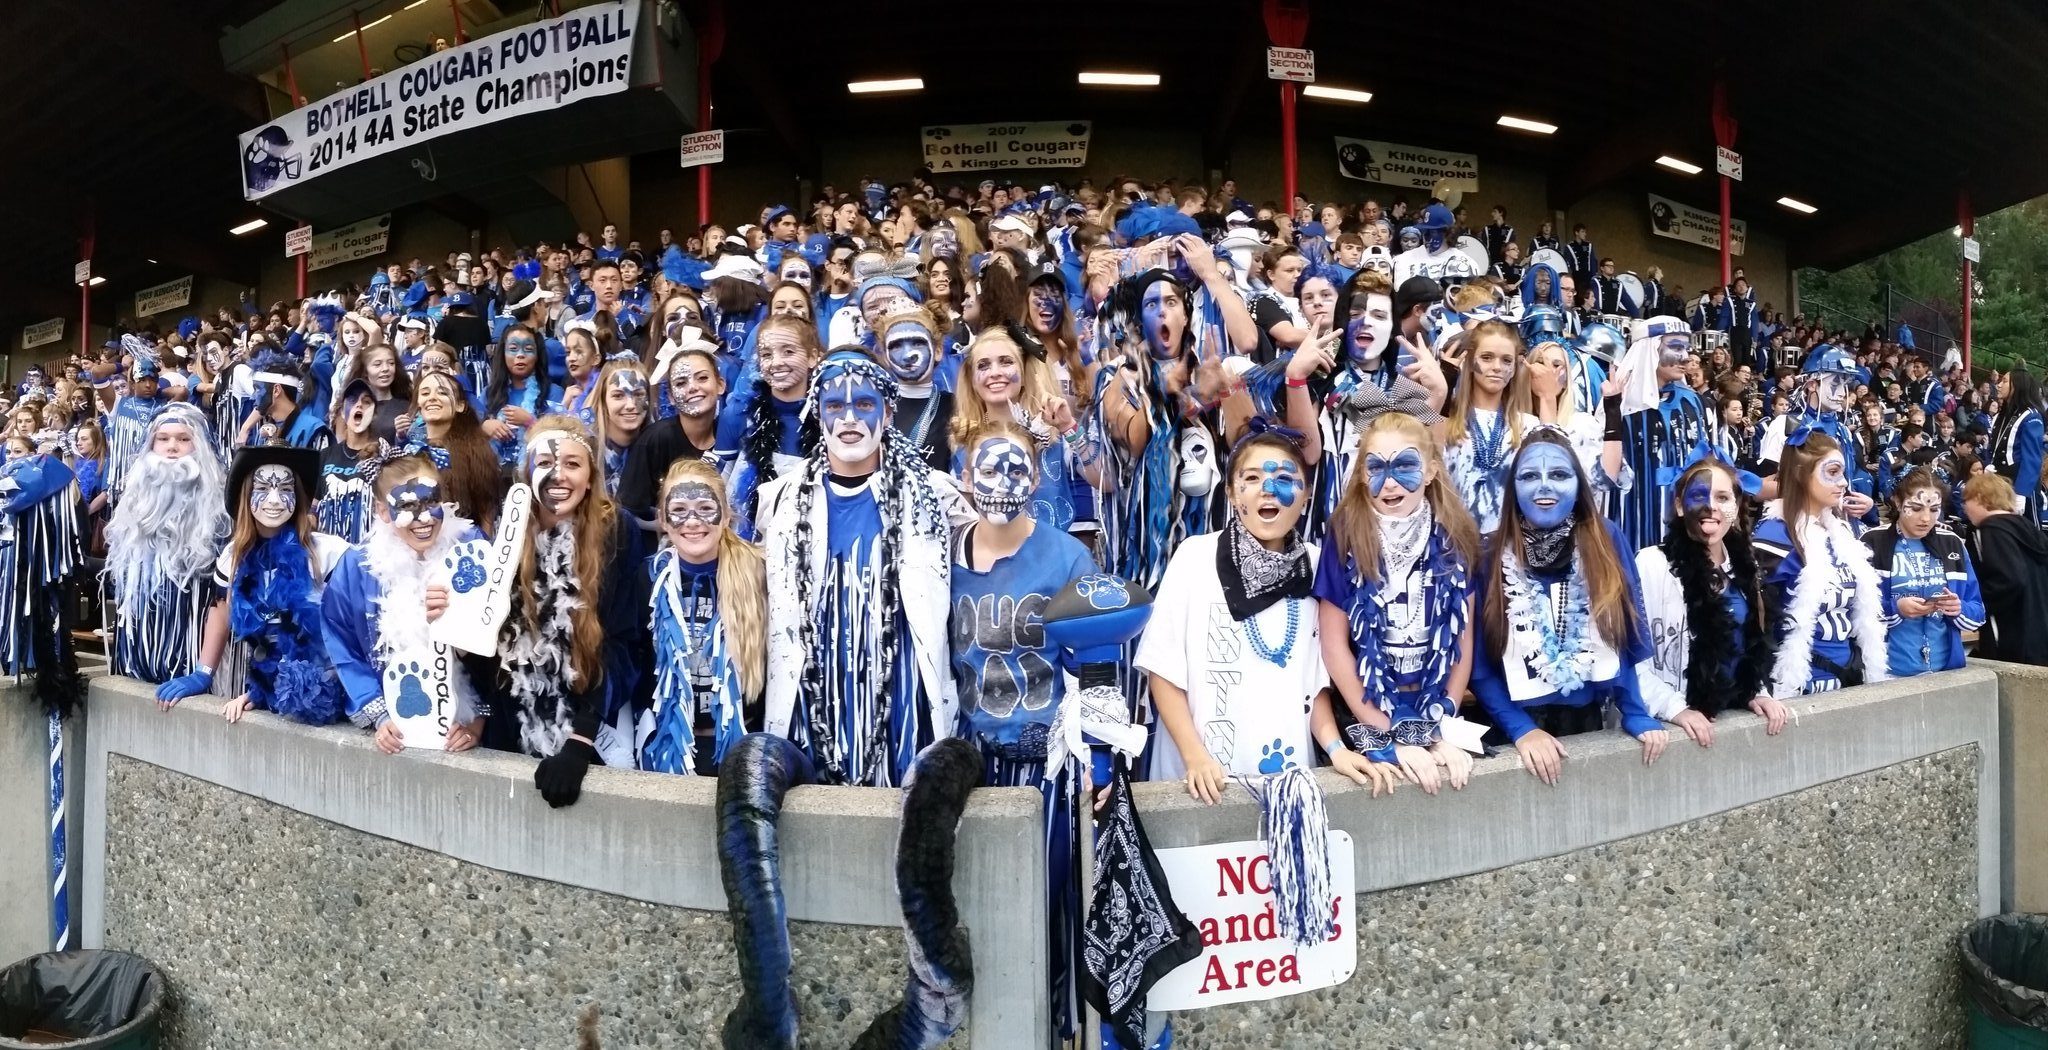 Bothell students prepare for the week four game against Woodinville on Sept. 23. JOHN WILLIAM HOWARD/Bothell-Kenmore Reporter